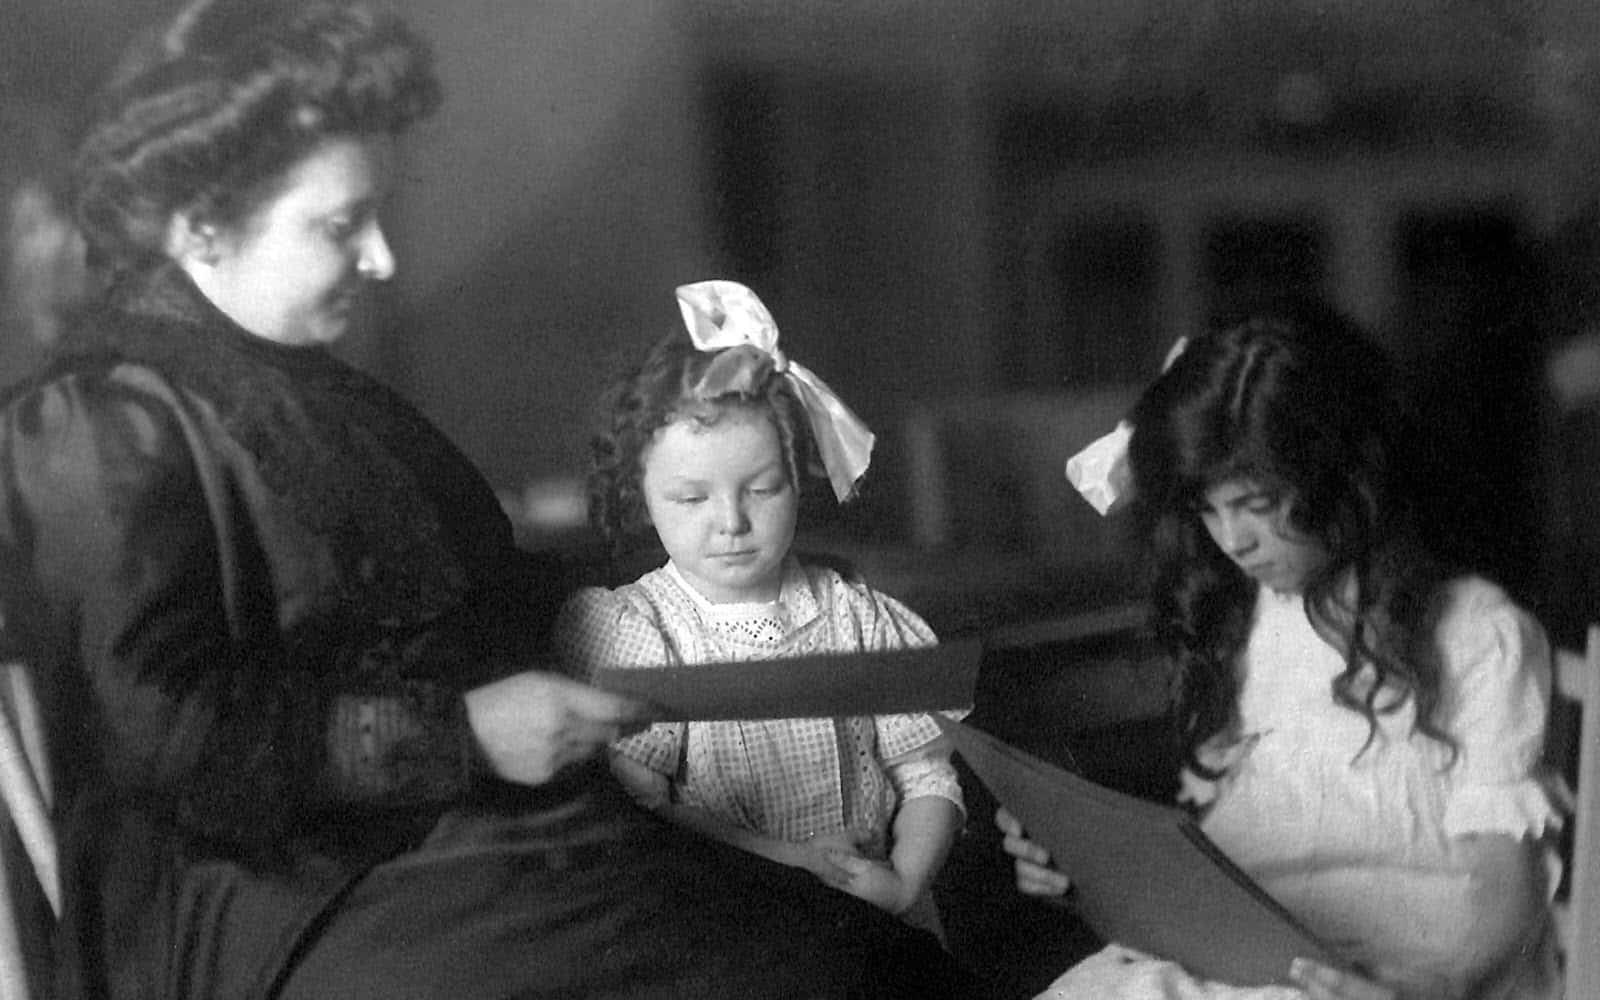 150 Years: Supporting the Growth of Montessori for All Children